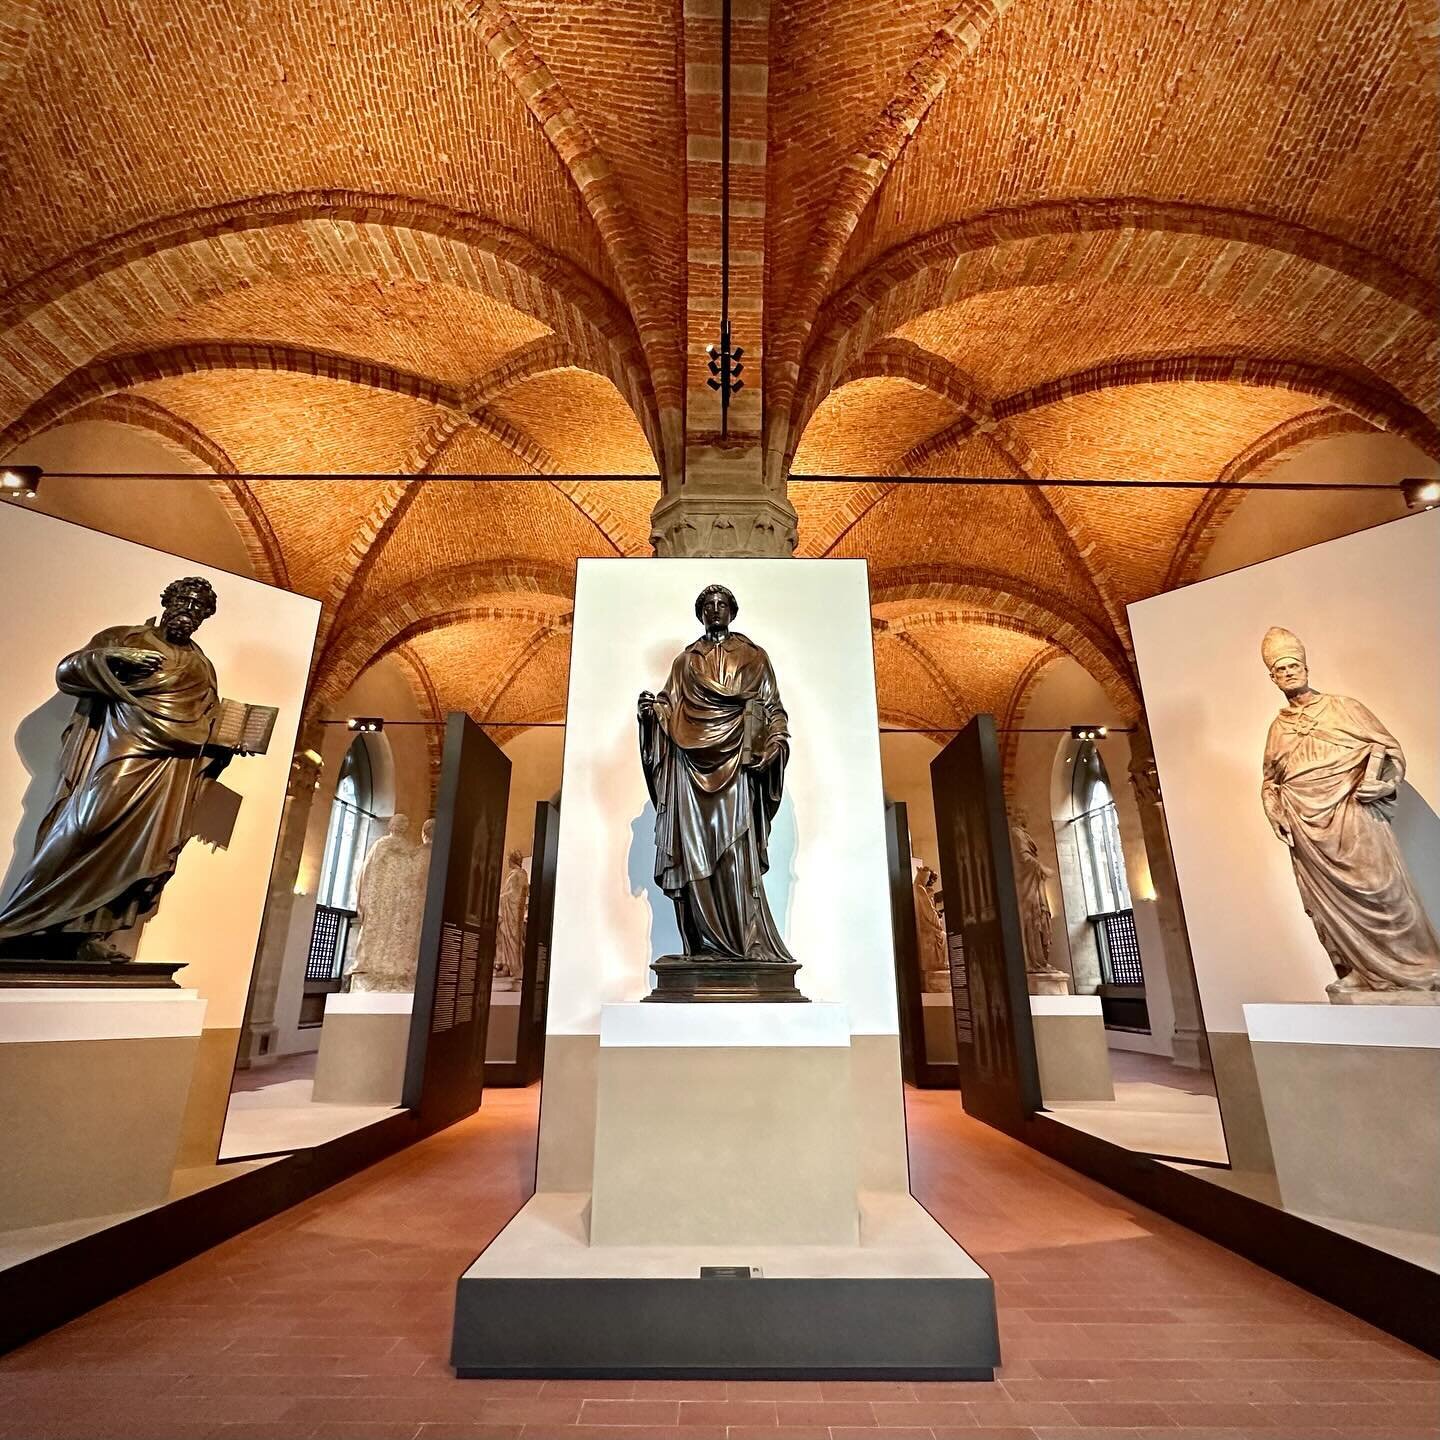 After over a year of waiting, Orsanmichele has finally reopened its doors! Located in the very heart of Florence in between the religious and political hearts of the city (Piazza del Duomo and Piazza della Signoria, respectively), this 13th-c granary